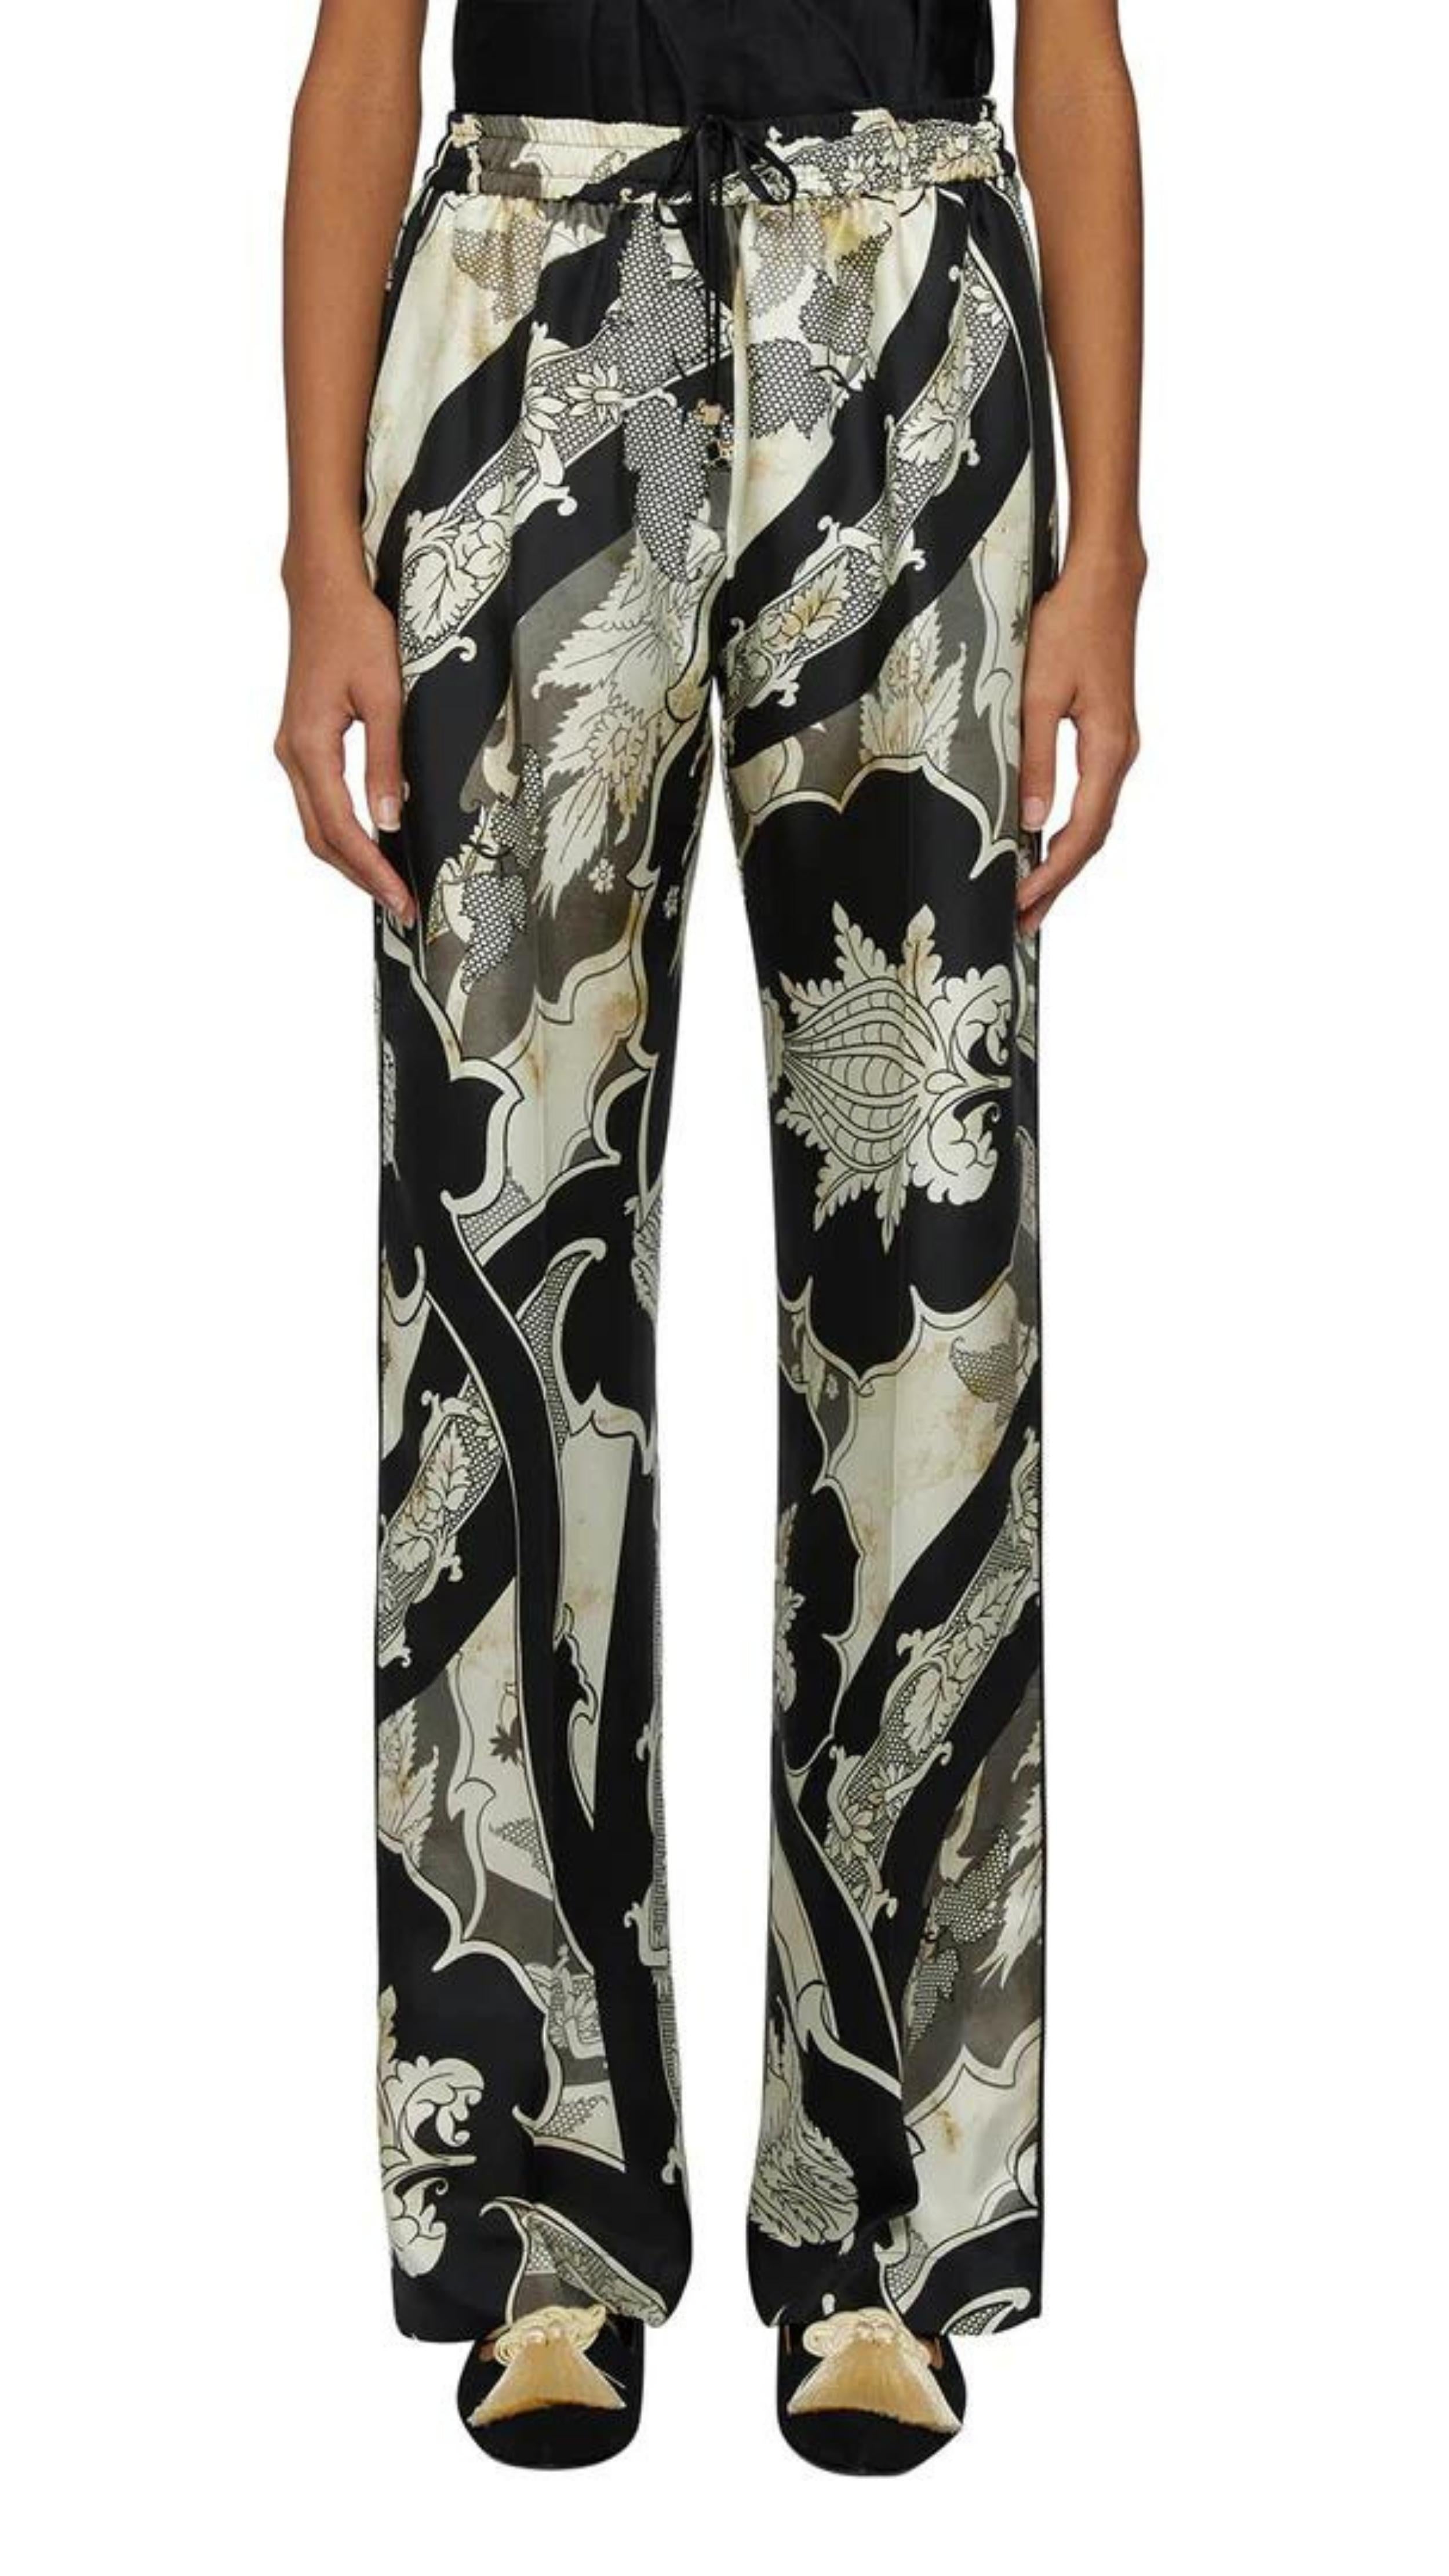 For Restless Sleepers Doride Trousers in Black and Ivory. Elastic waist straight leg pant n 100% silk. Pajama style in beautiful black and white print. Shown on model facing forward.